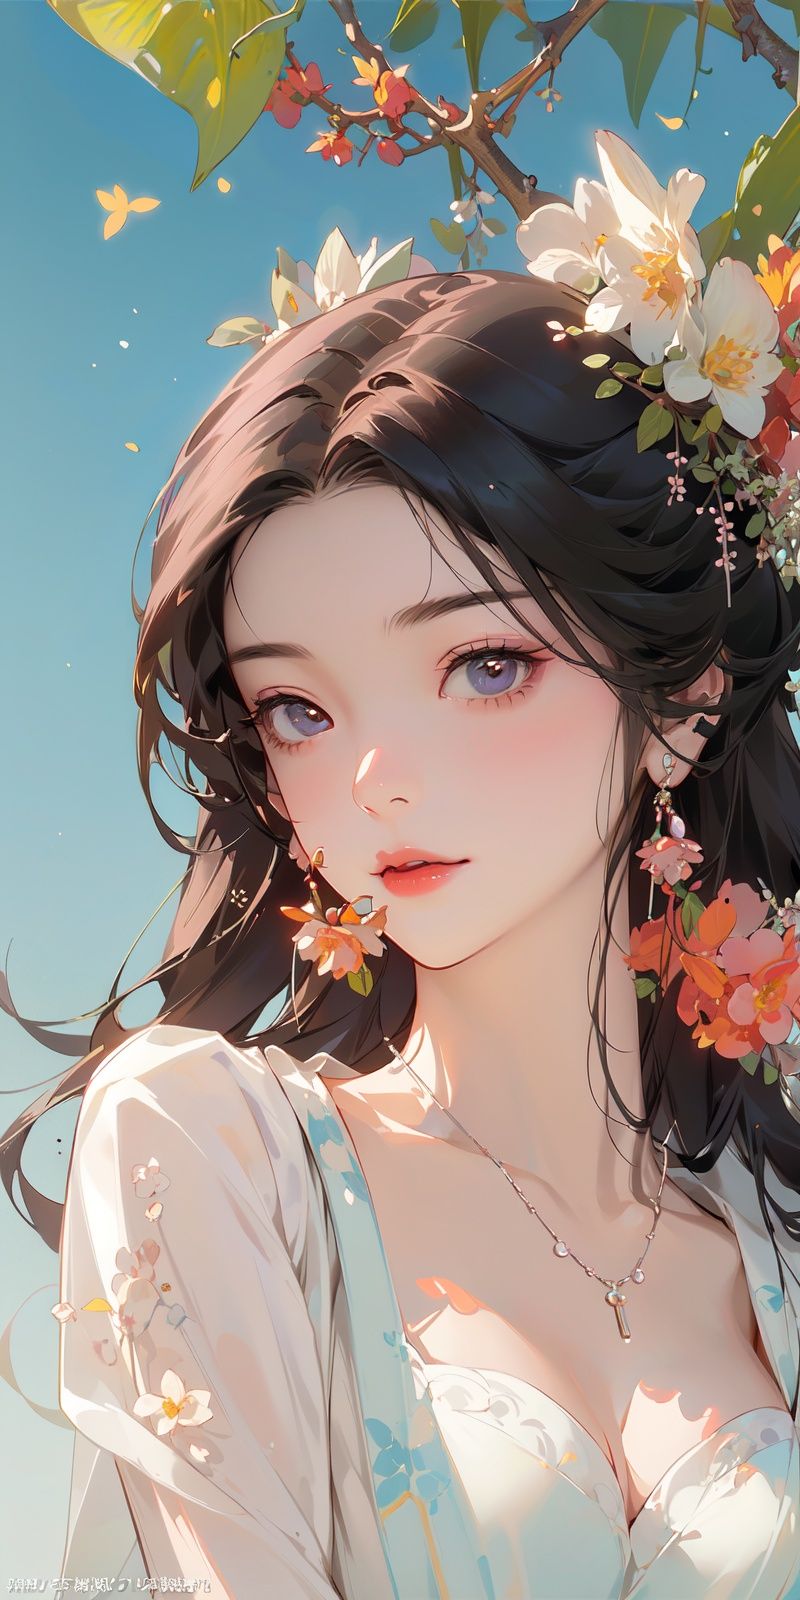 nsfw,(Masterpiece:1.2, high quality), (pixiv:1.4),Eyebrows like willow leaves, ,The face is as beautiful as a flower, the eyes are tender. Small waist, big breasts, revealing cleavage; Lips slightly open, seductive expression. <lora:Chinese style_20230608163116-000018:0.8>